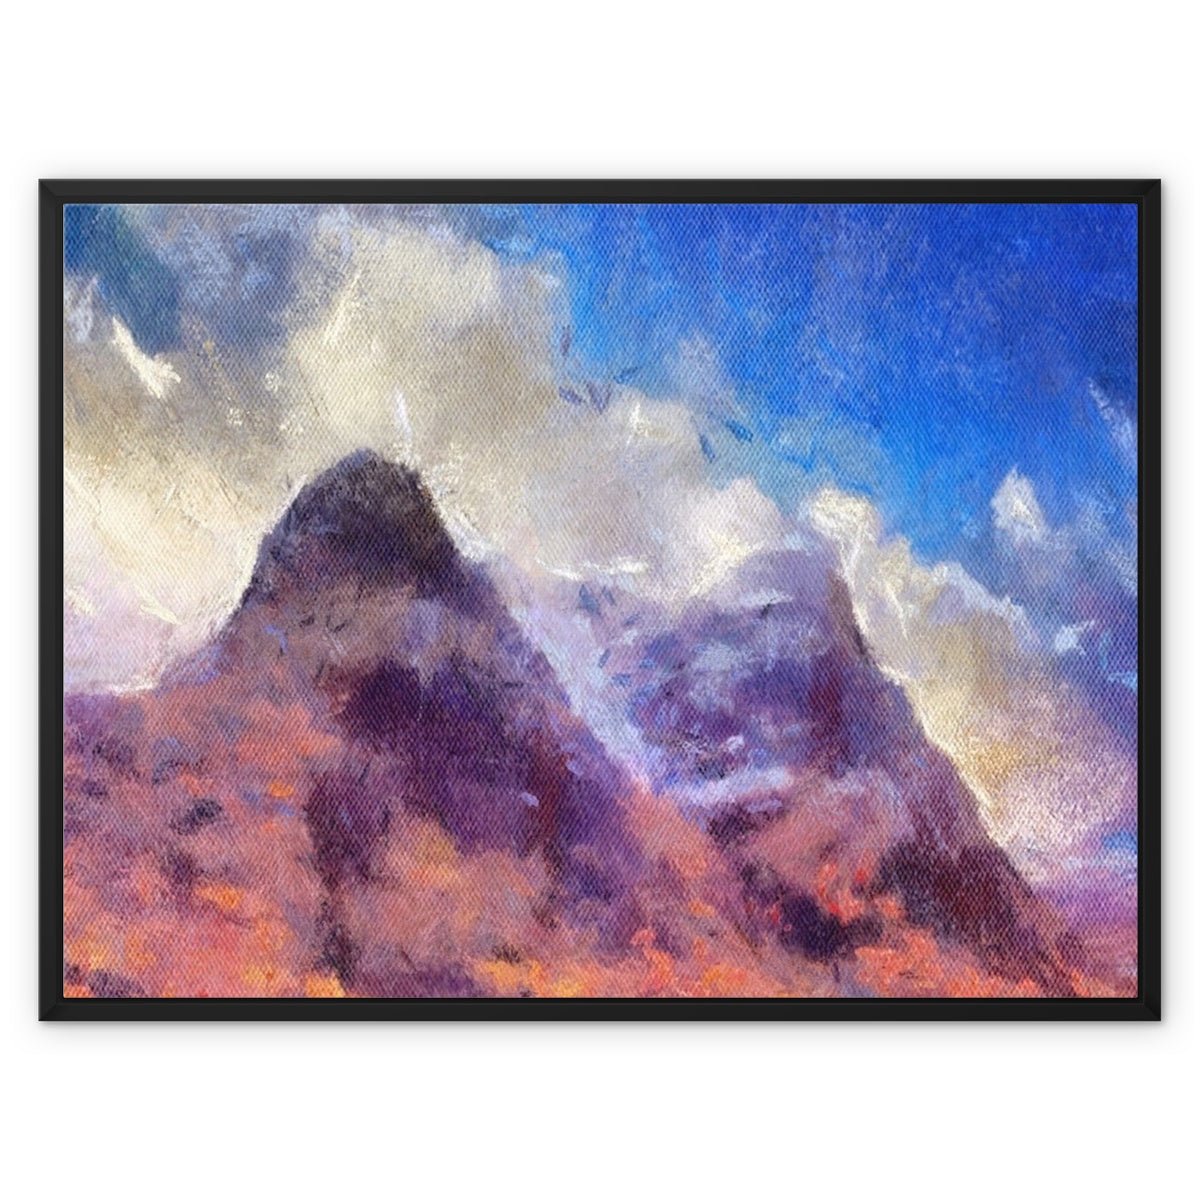 Glencoe Painting | Framed Canvas From Scotland-Floating Framed Canvas Prints-Glencoe Art Gallery-32"x24"-Black Frame-Paintings, Prints, Homeware, Art Gifts From Scotland By Scottish Artist Kevin Hunter